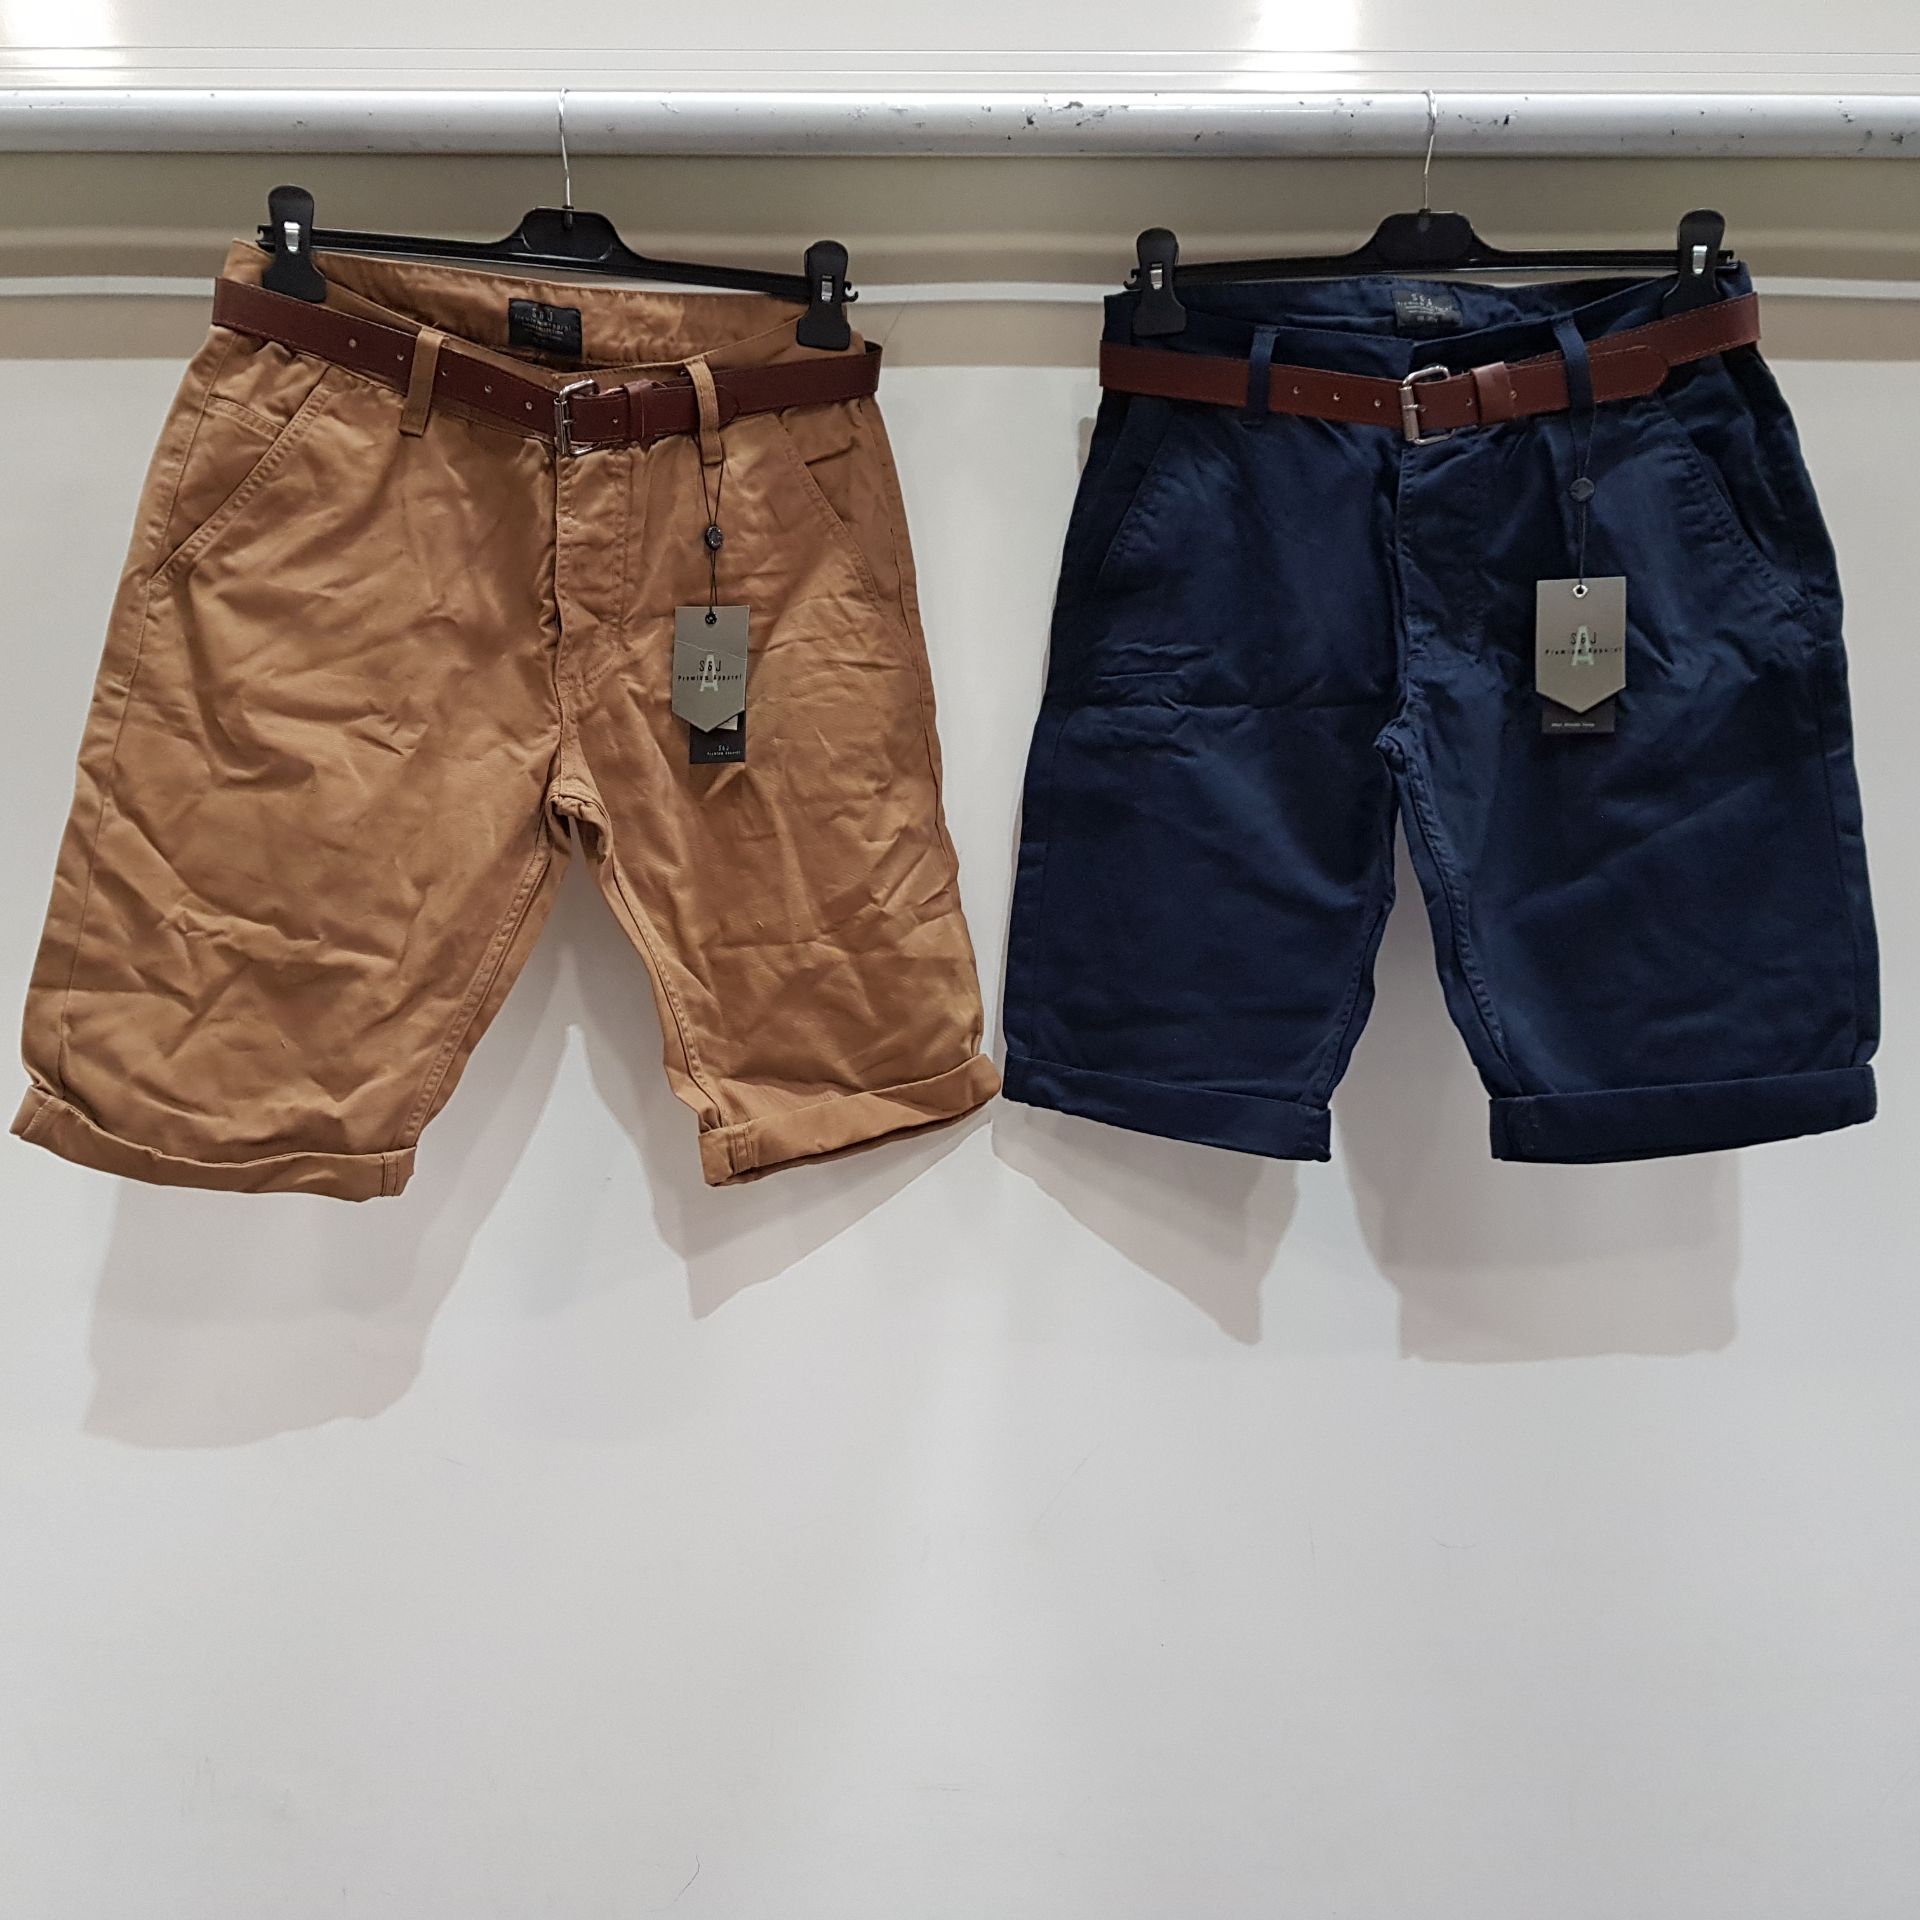 11 X BRAND NEW S&J PREMIUM LUXURY CHINO SHORTS WITH BELT 9 IN CAMEL SIZE 30W AND 2 IN NAVY SIZE